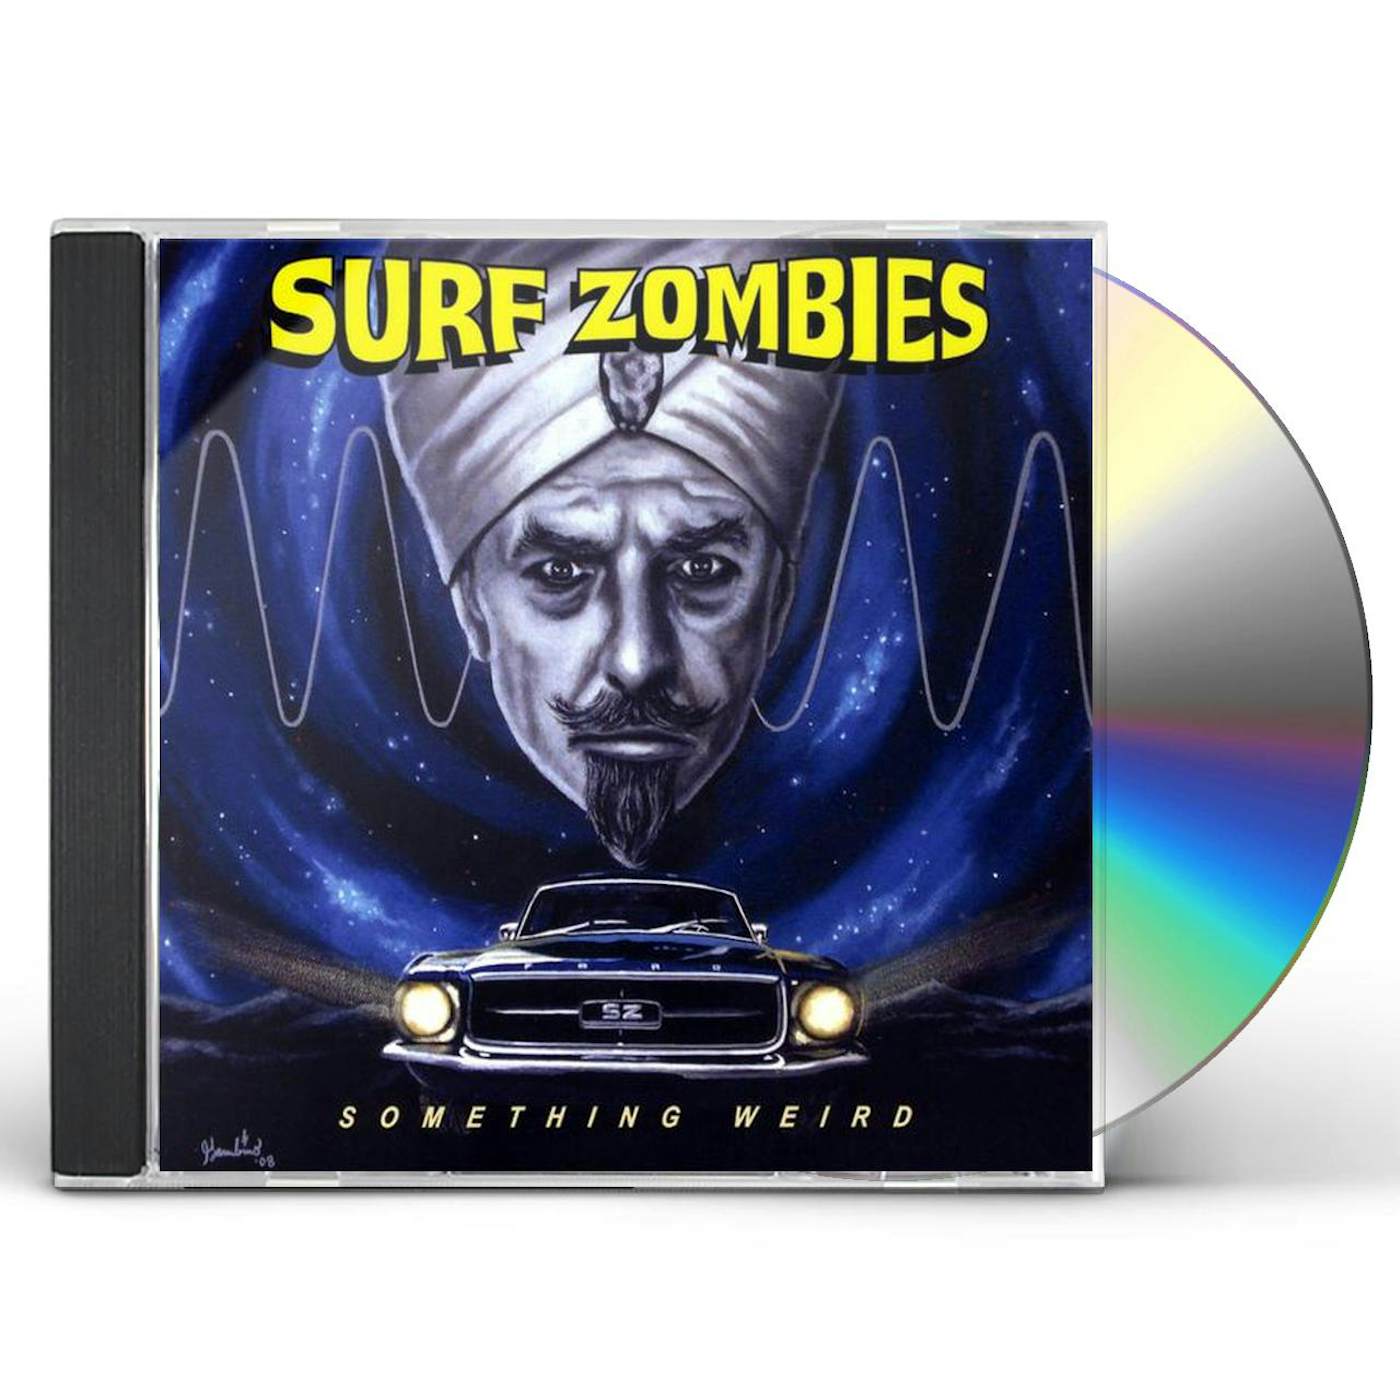 The Surf Zombies SOMETHING WEIRD CD